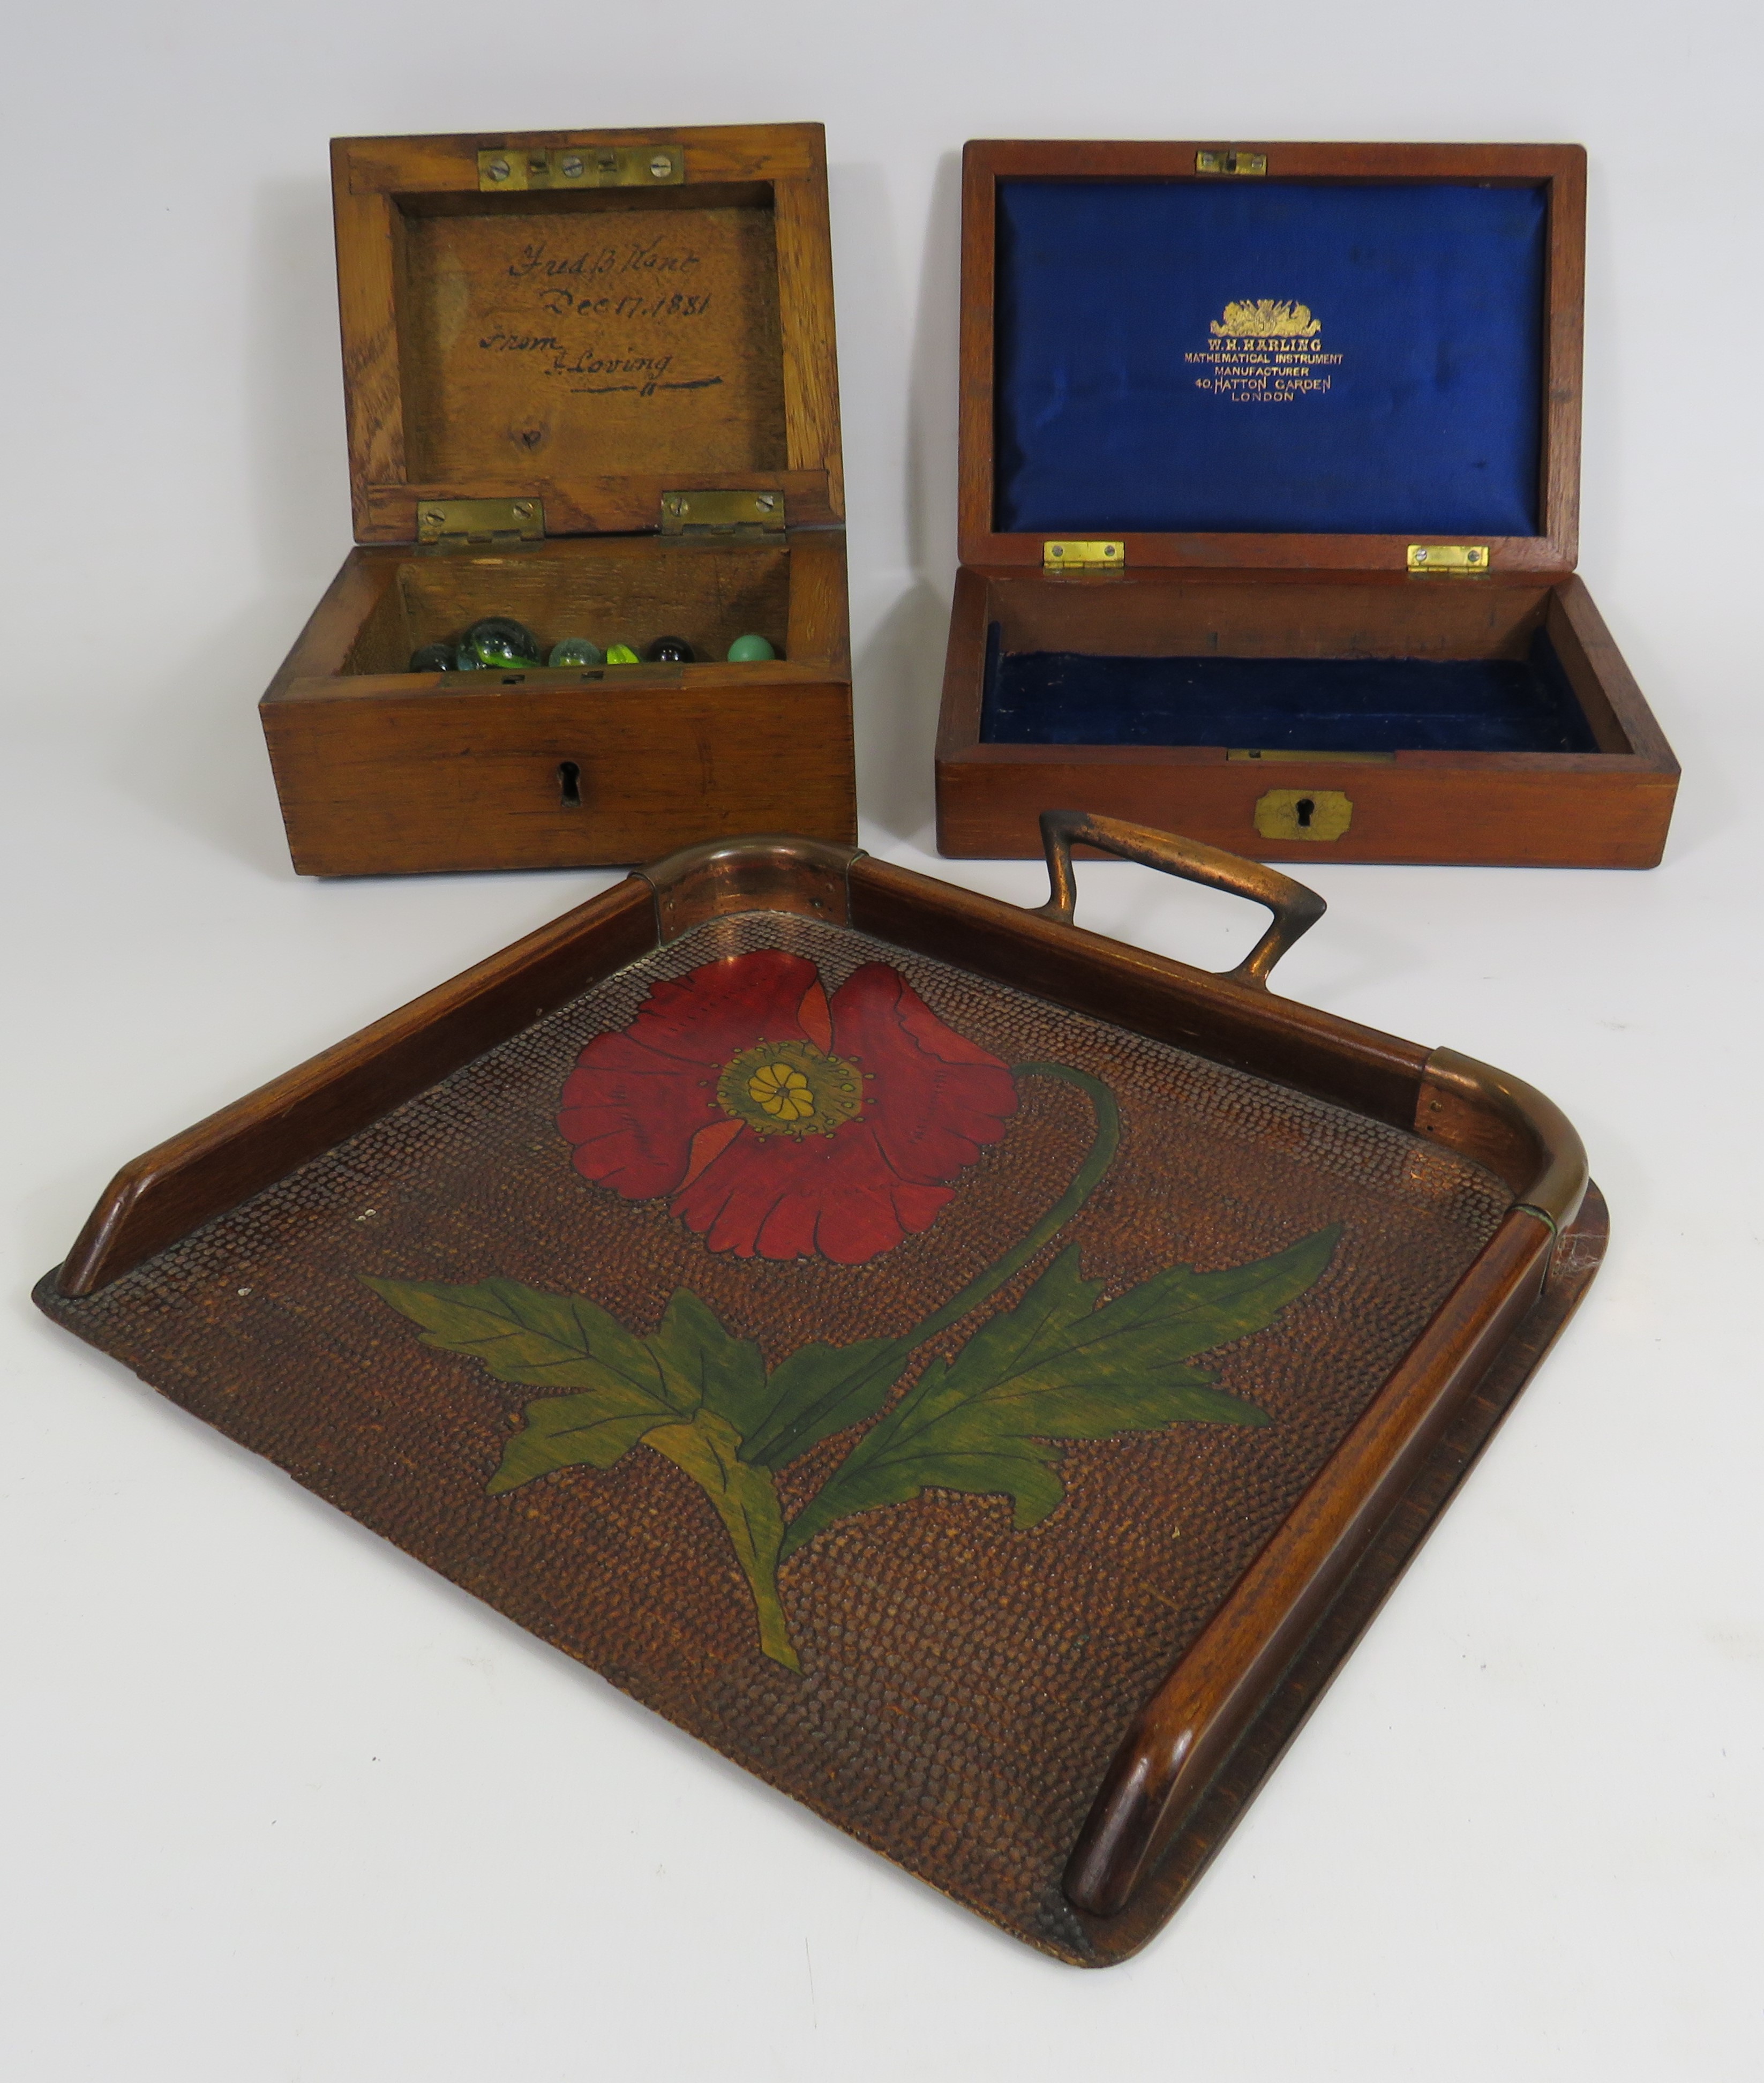 2 Vintage wooden storage boxes and contents of mables plus a vintage crumb tray decorated with a